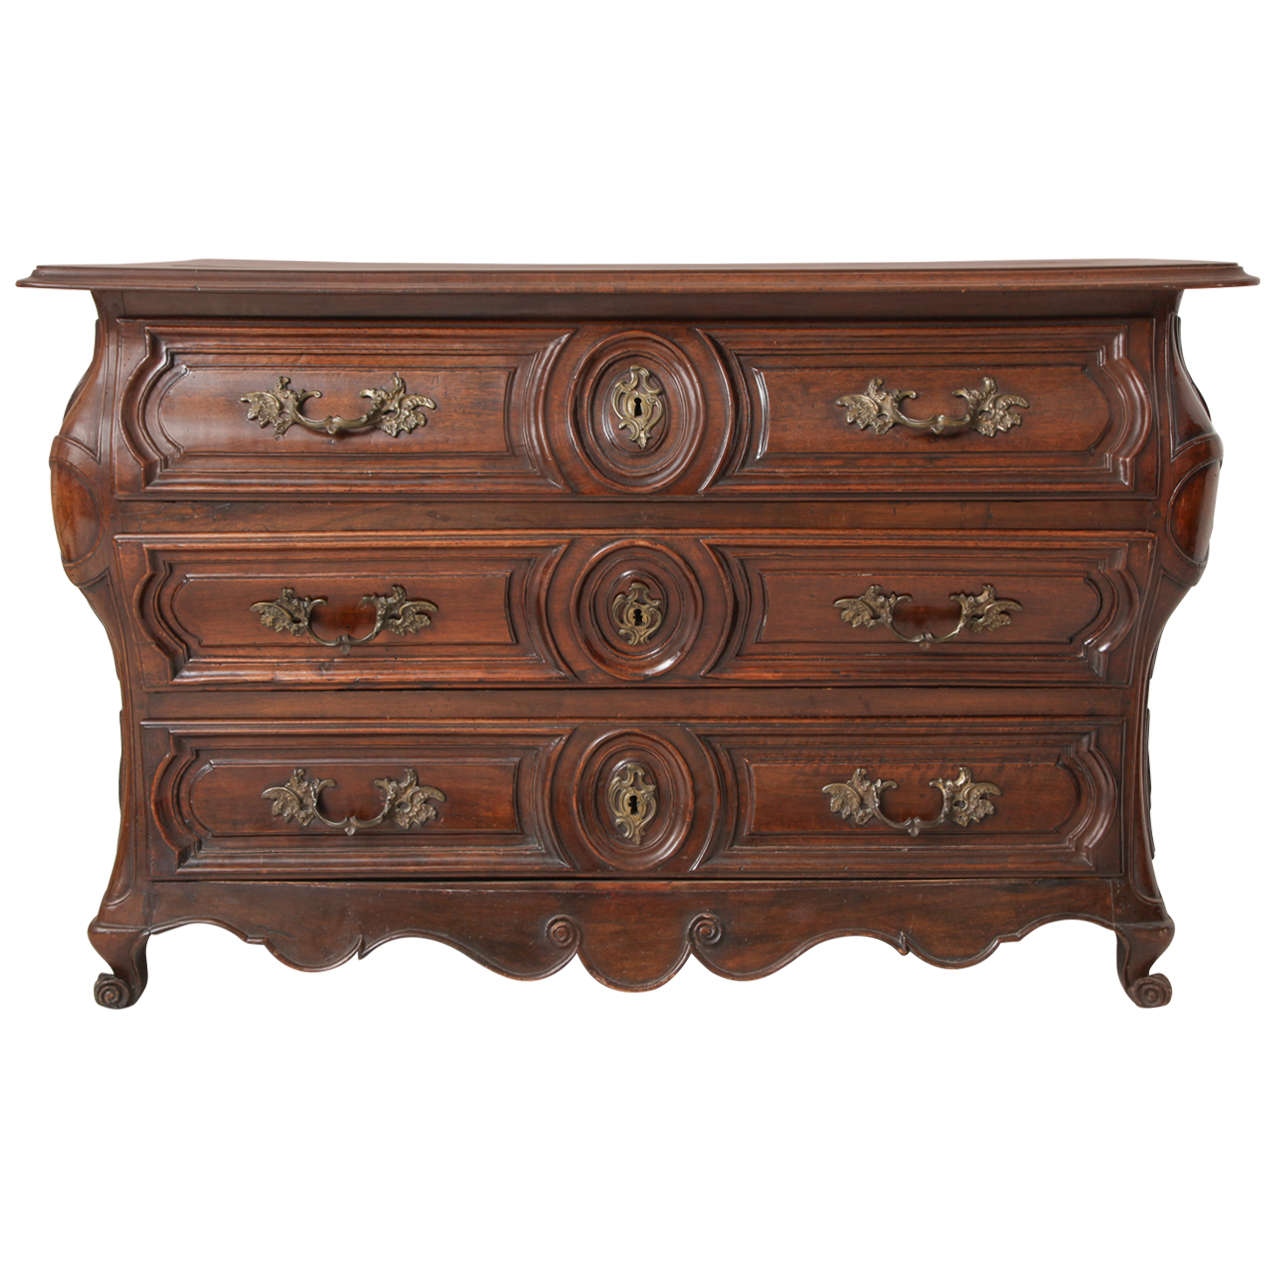 Louis XV Walnut Commode, Second Quarter of the 18th Century